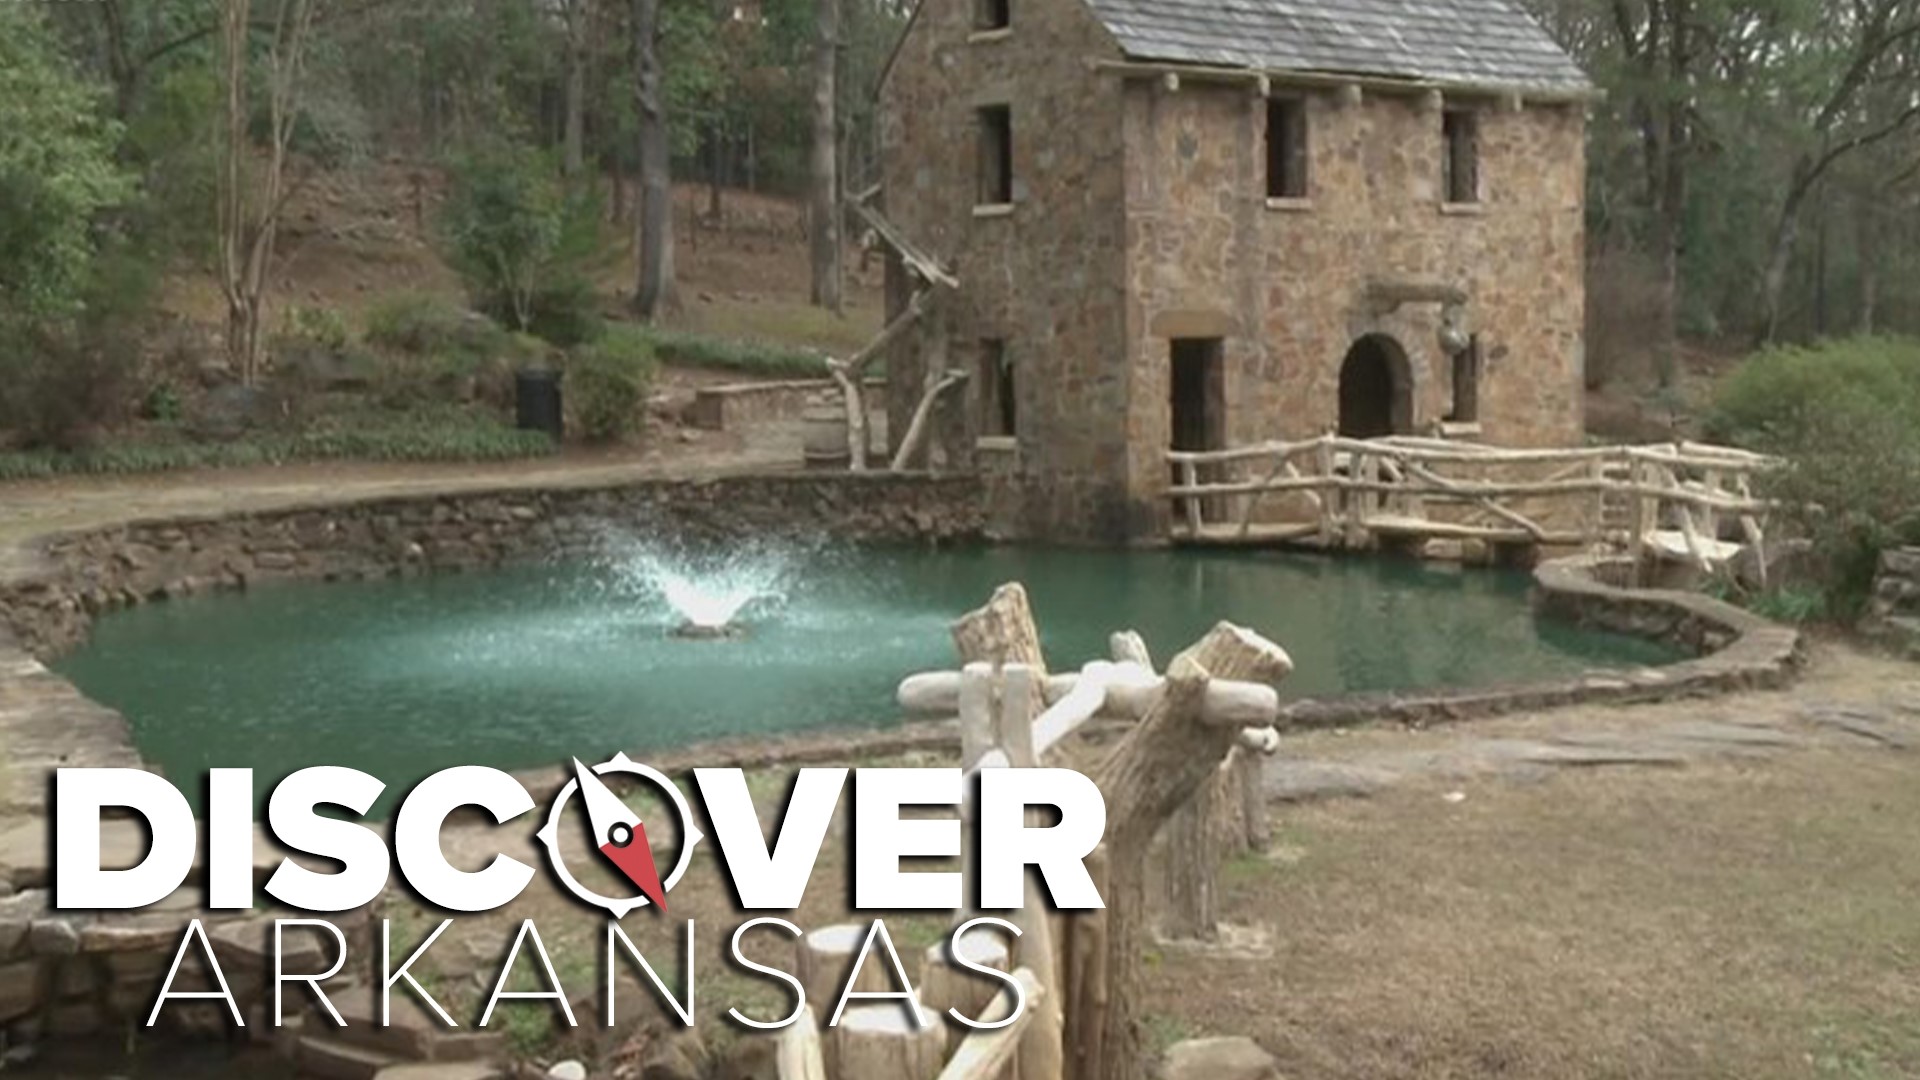 The Old Mill is most famous for being spotted in the 1939 opening credits of "Gone with the Wind."